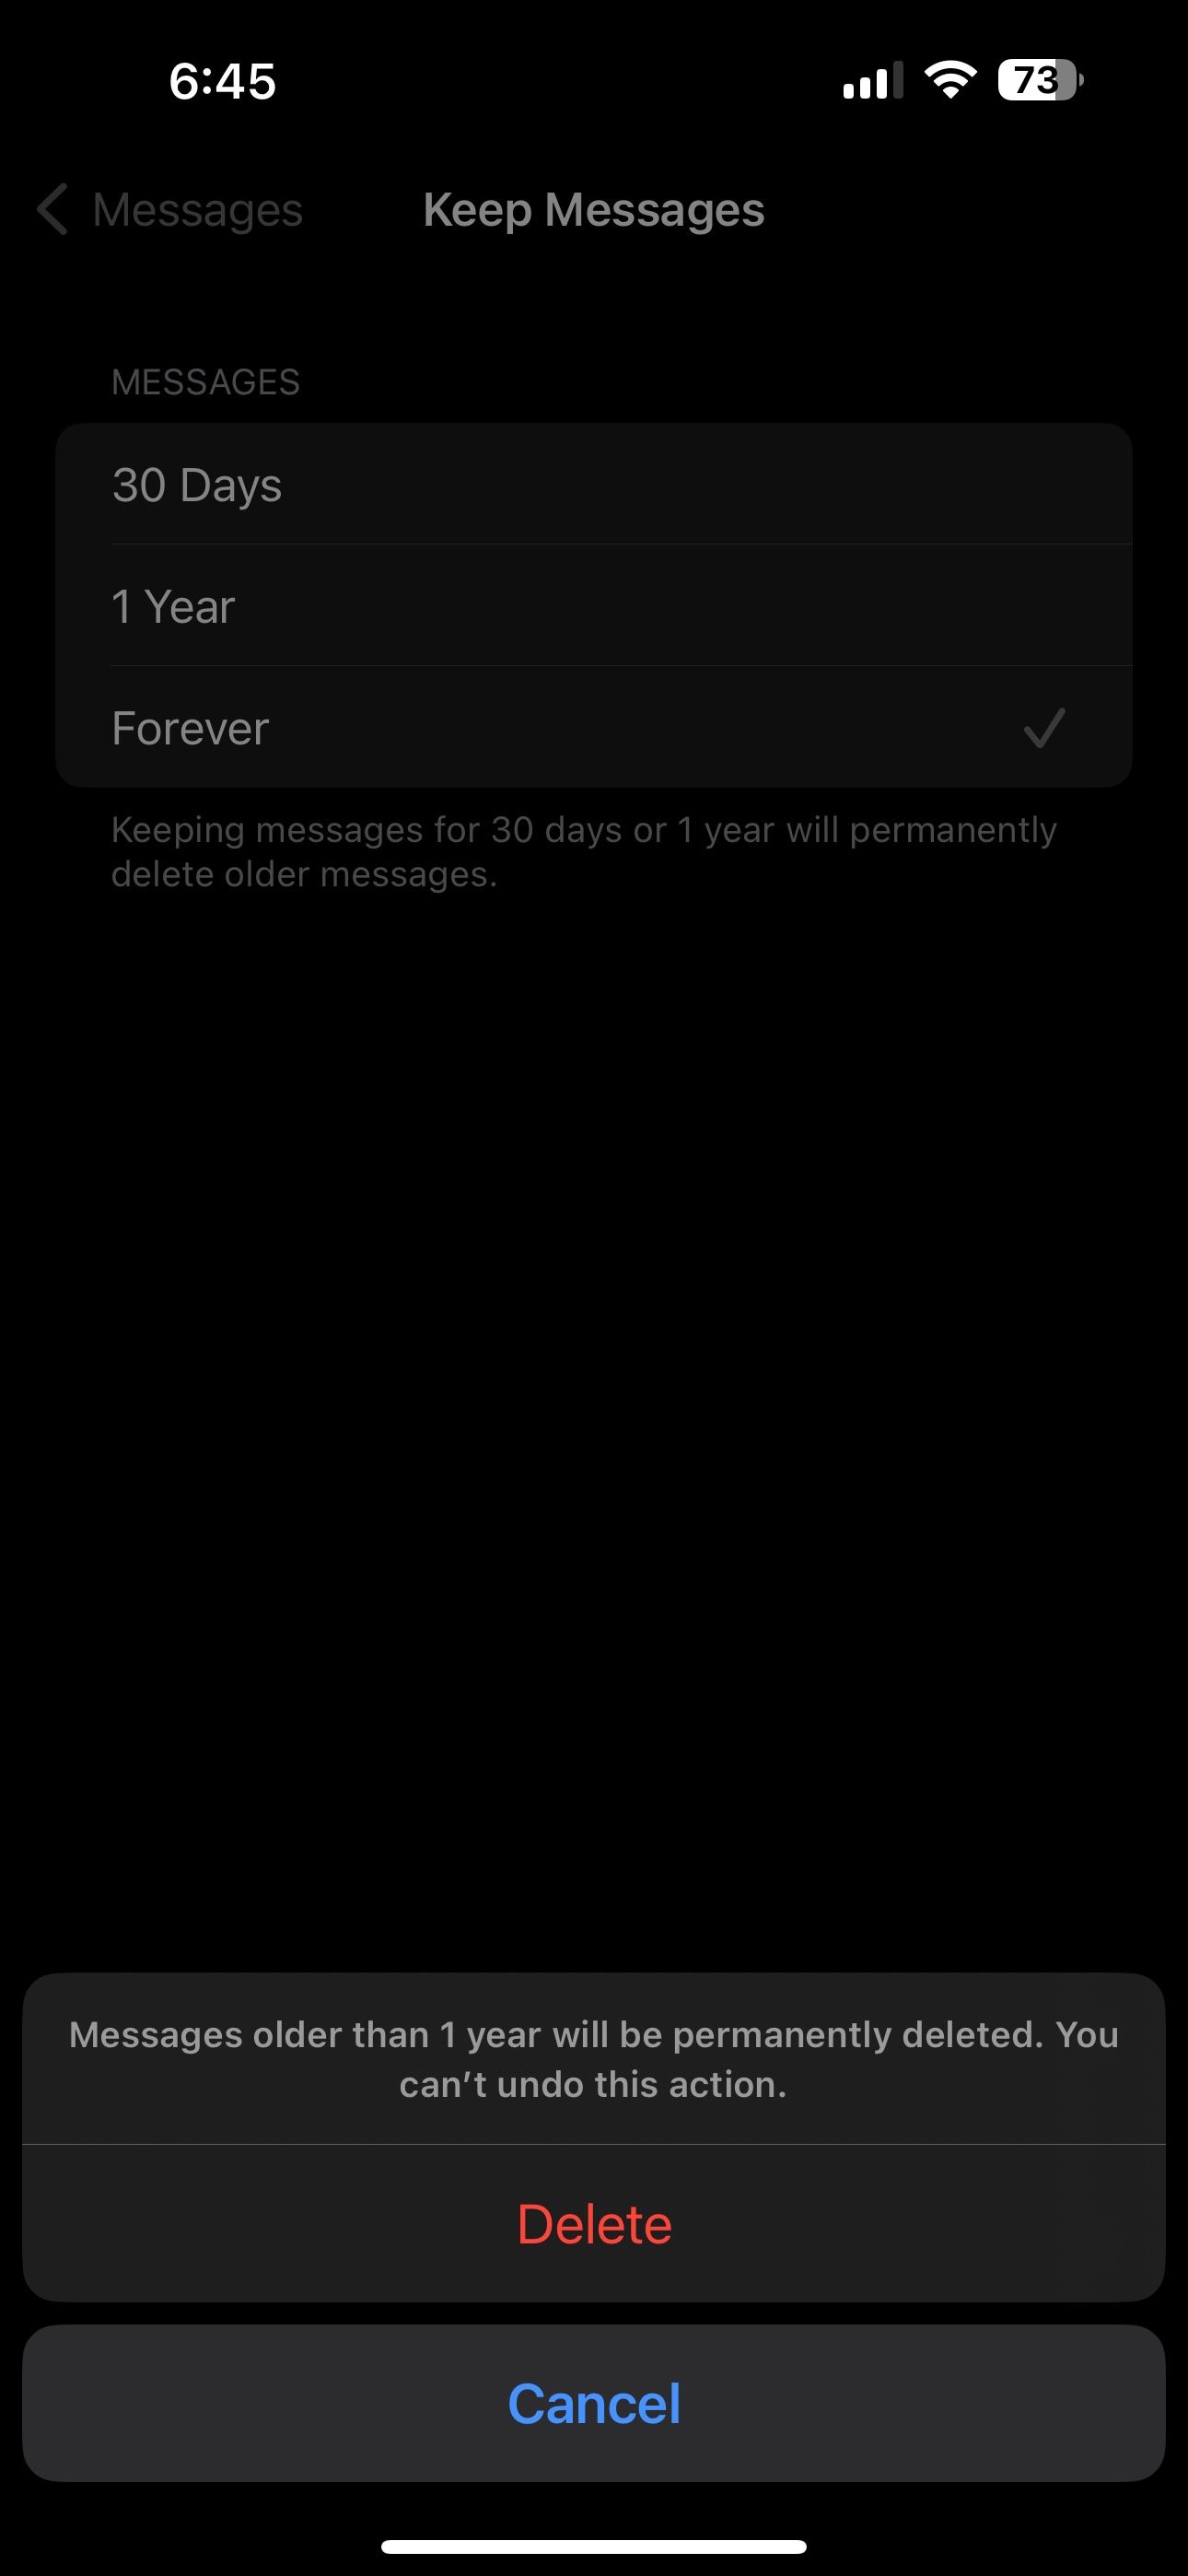 Delete Old Messages Option in Settings